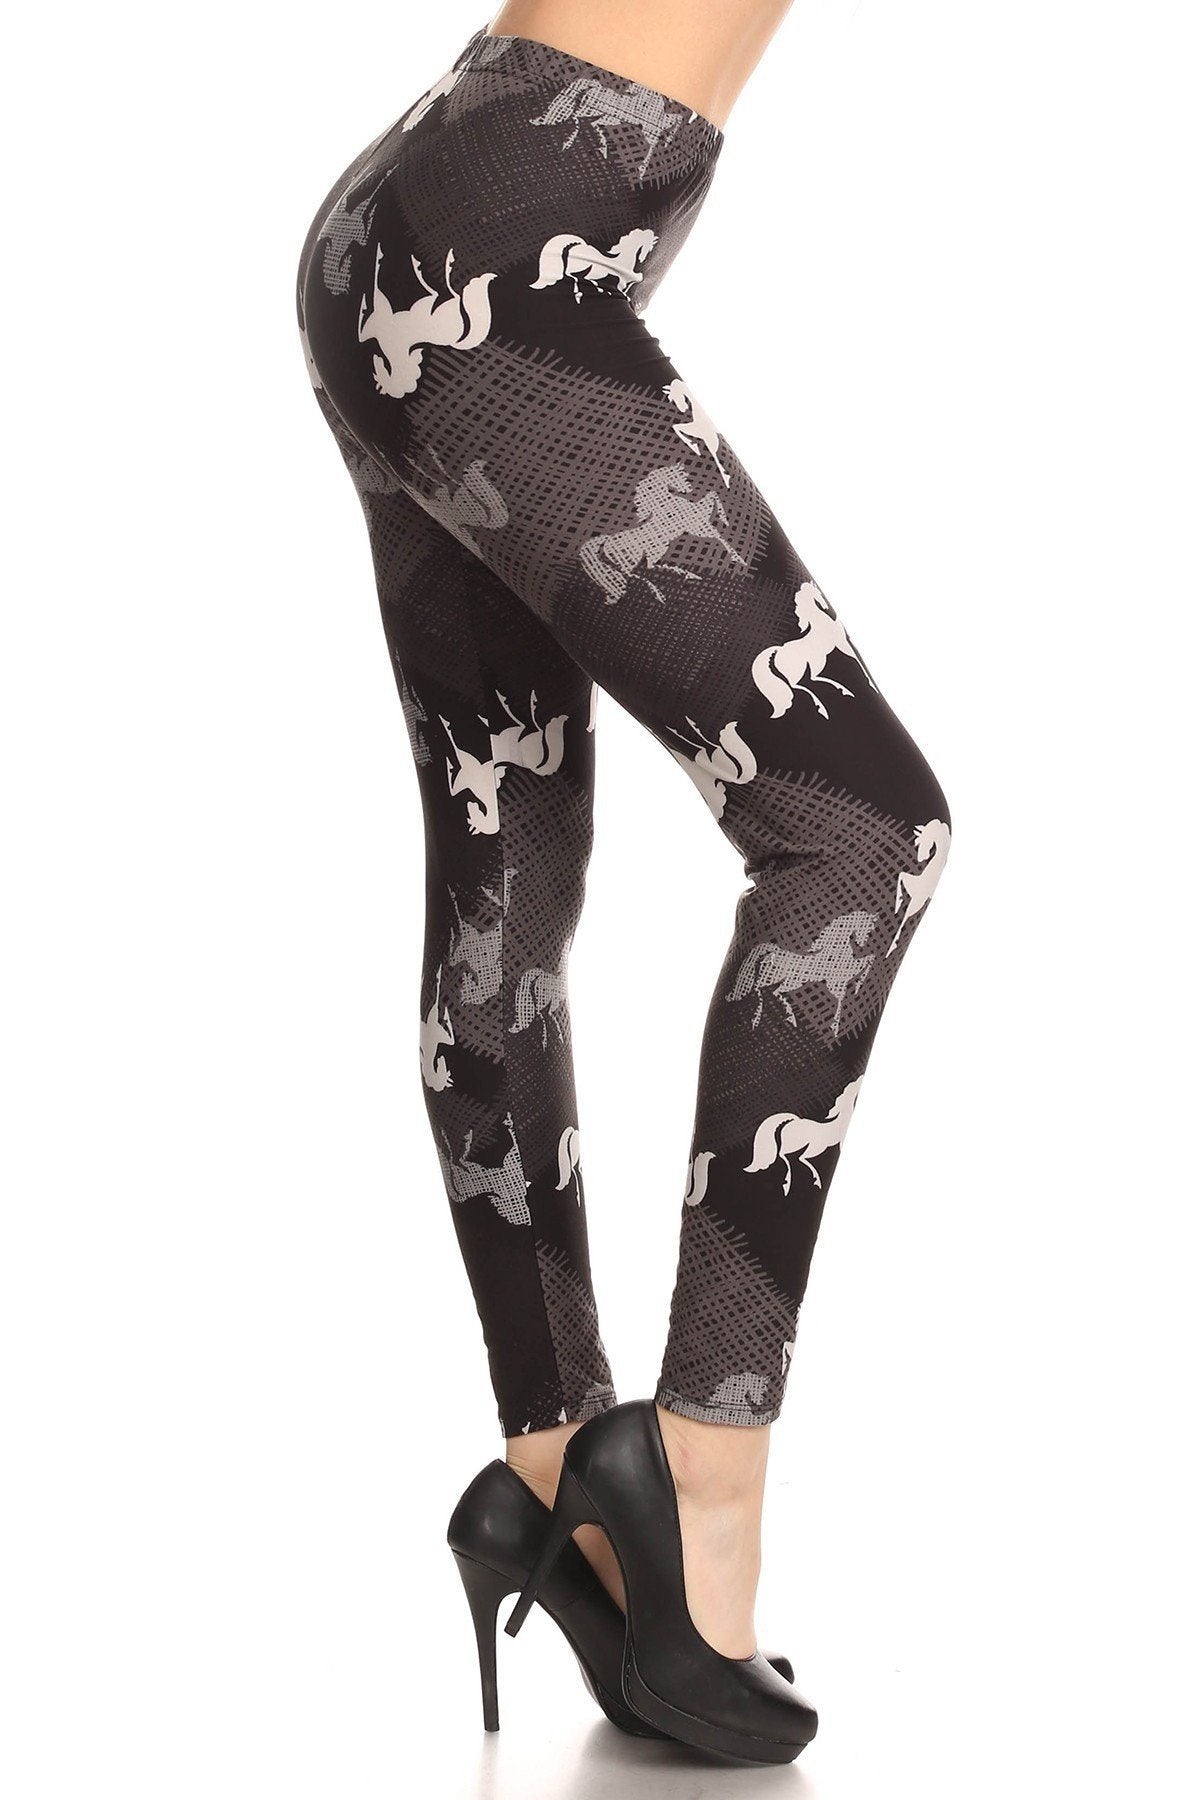 Women's Horse Printed Leggings Black: OS and Plus Leggings MomMe and More 